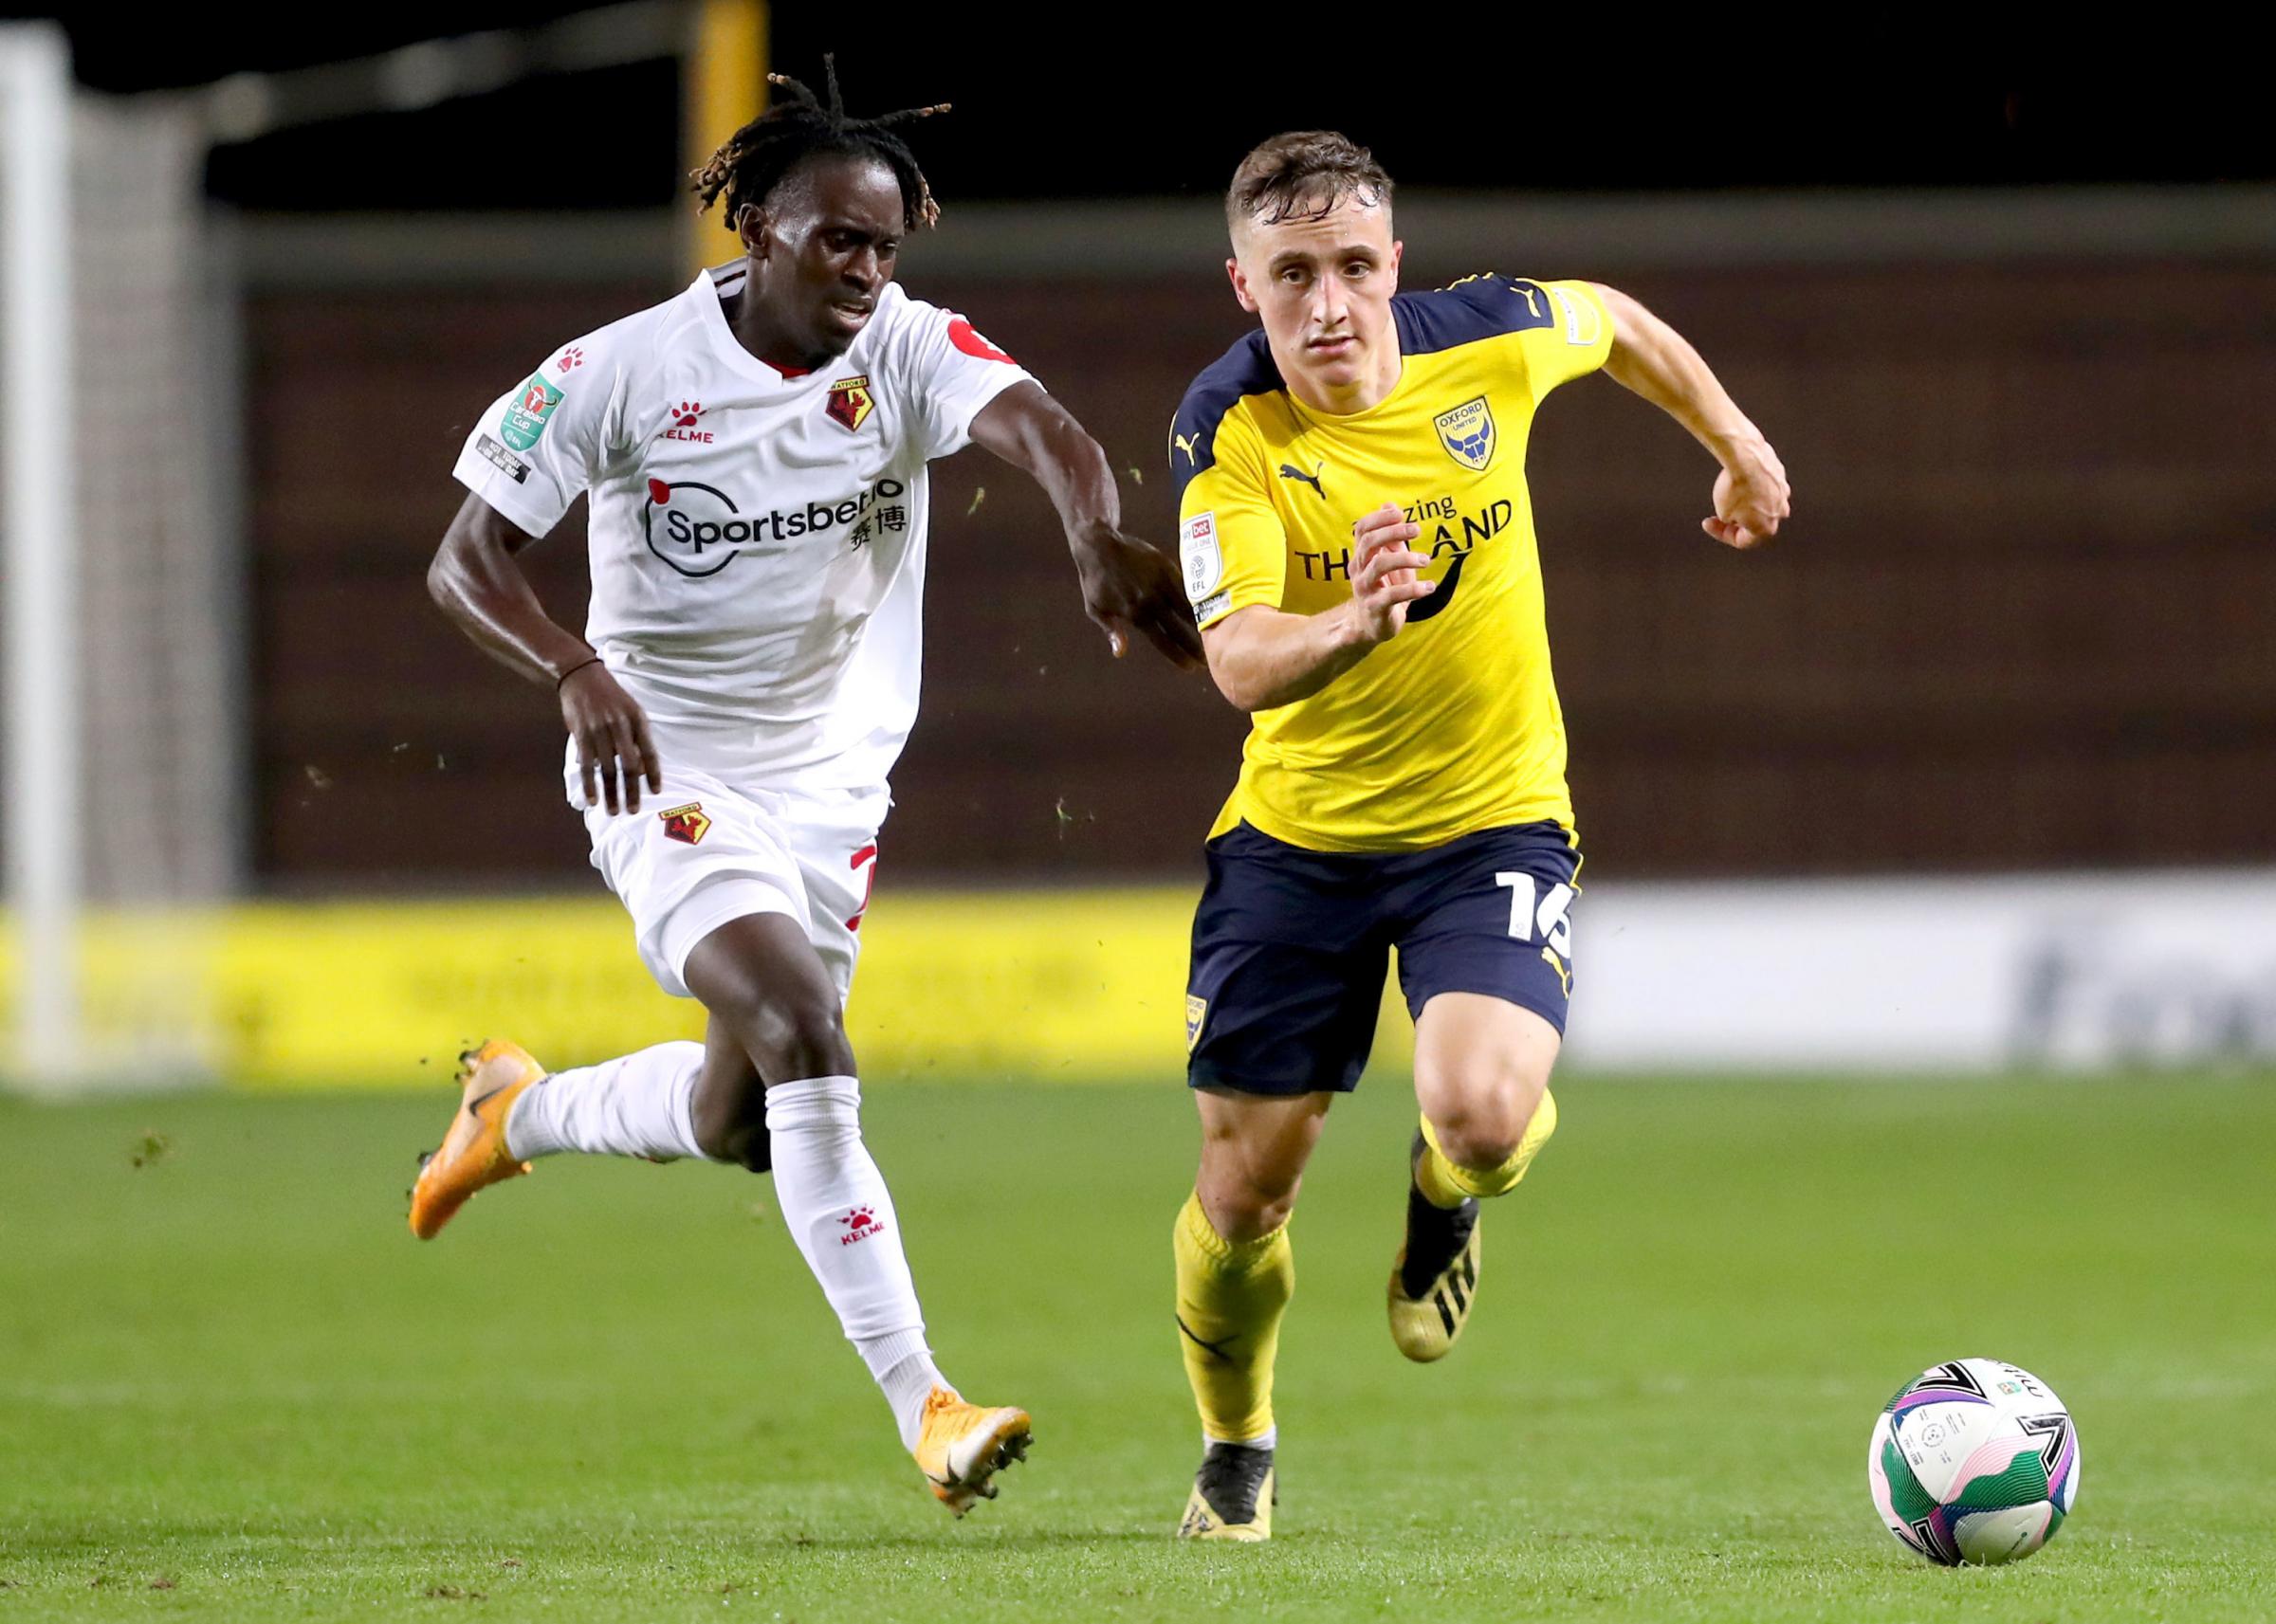 VIDEO: Highlights from Oxford United's clash with Watford